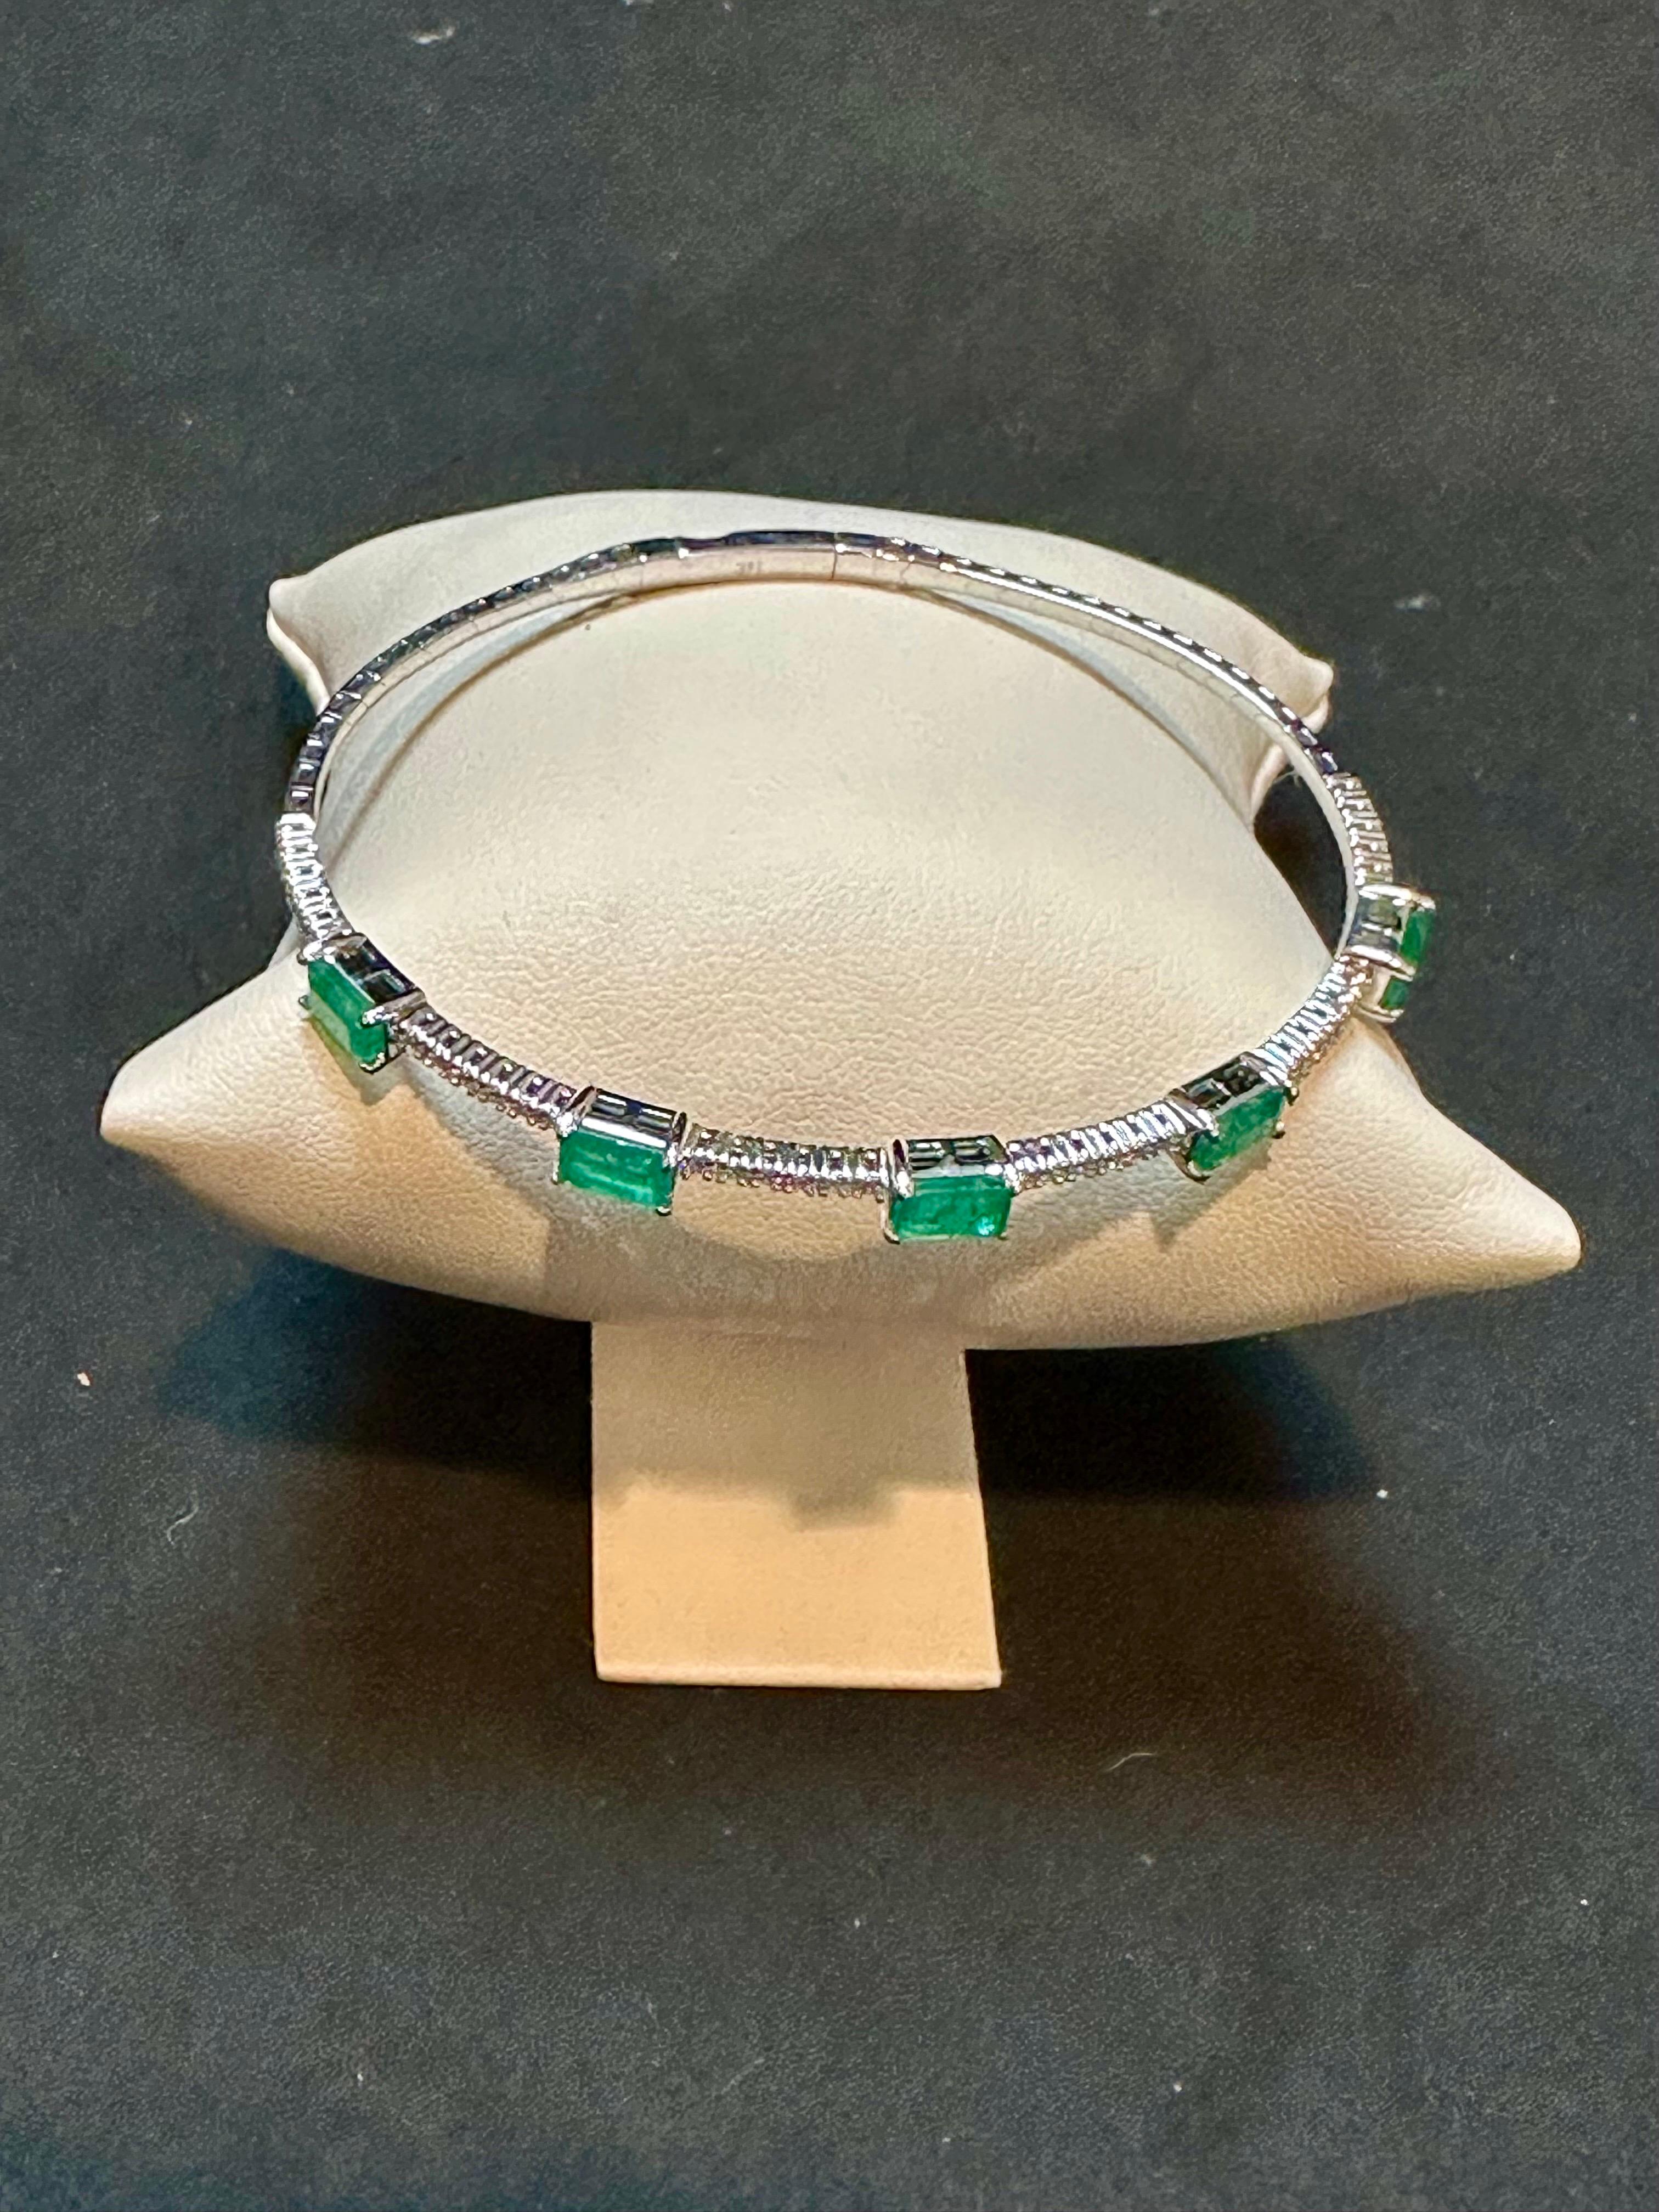 3 Carat Natural Brazilian Emerald & Diamond Bangle Bracelet 14 Karat White Gold In Excellent Condition For Sale In New York, NY